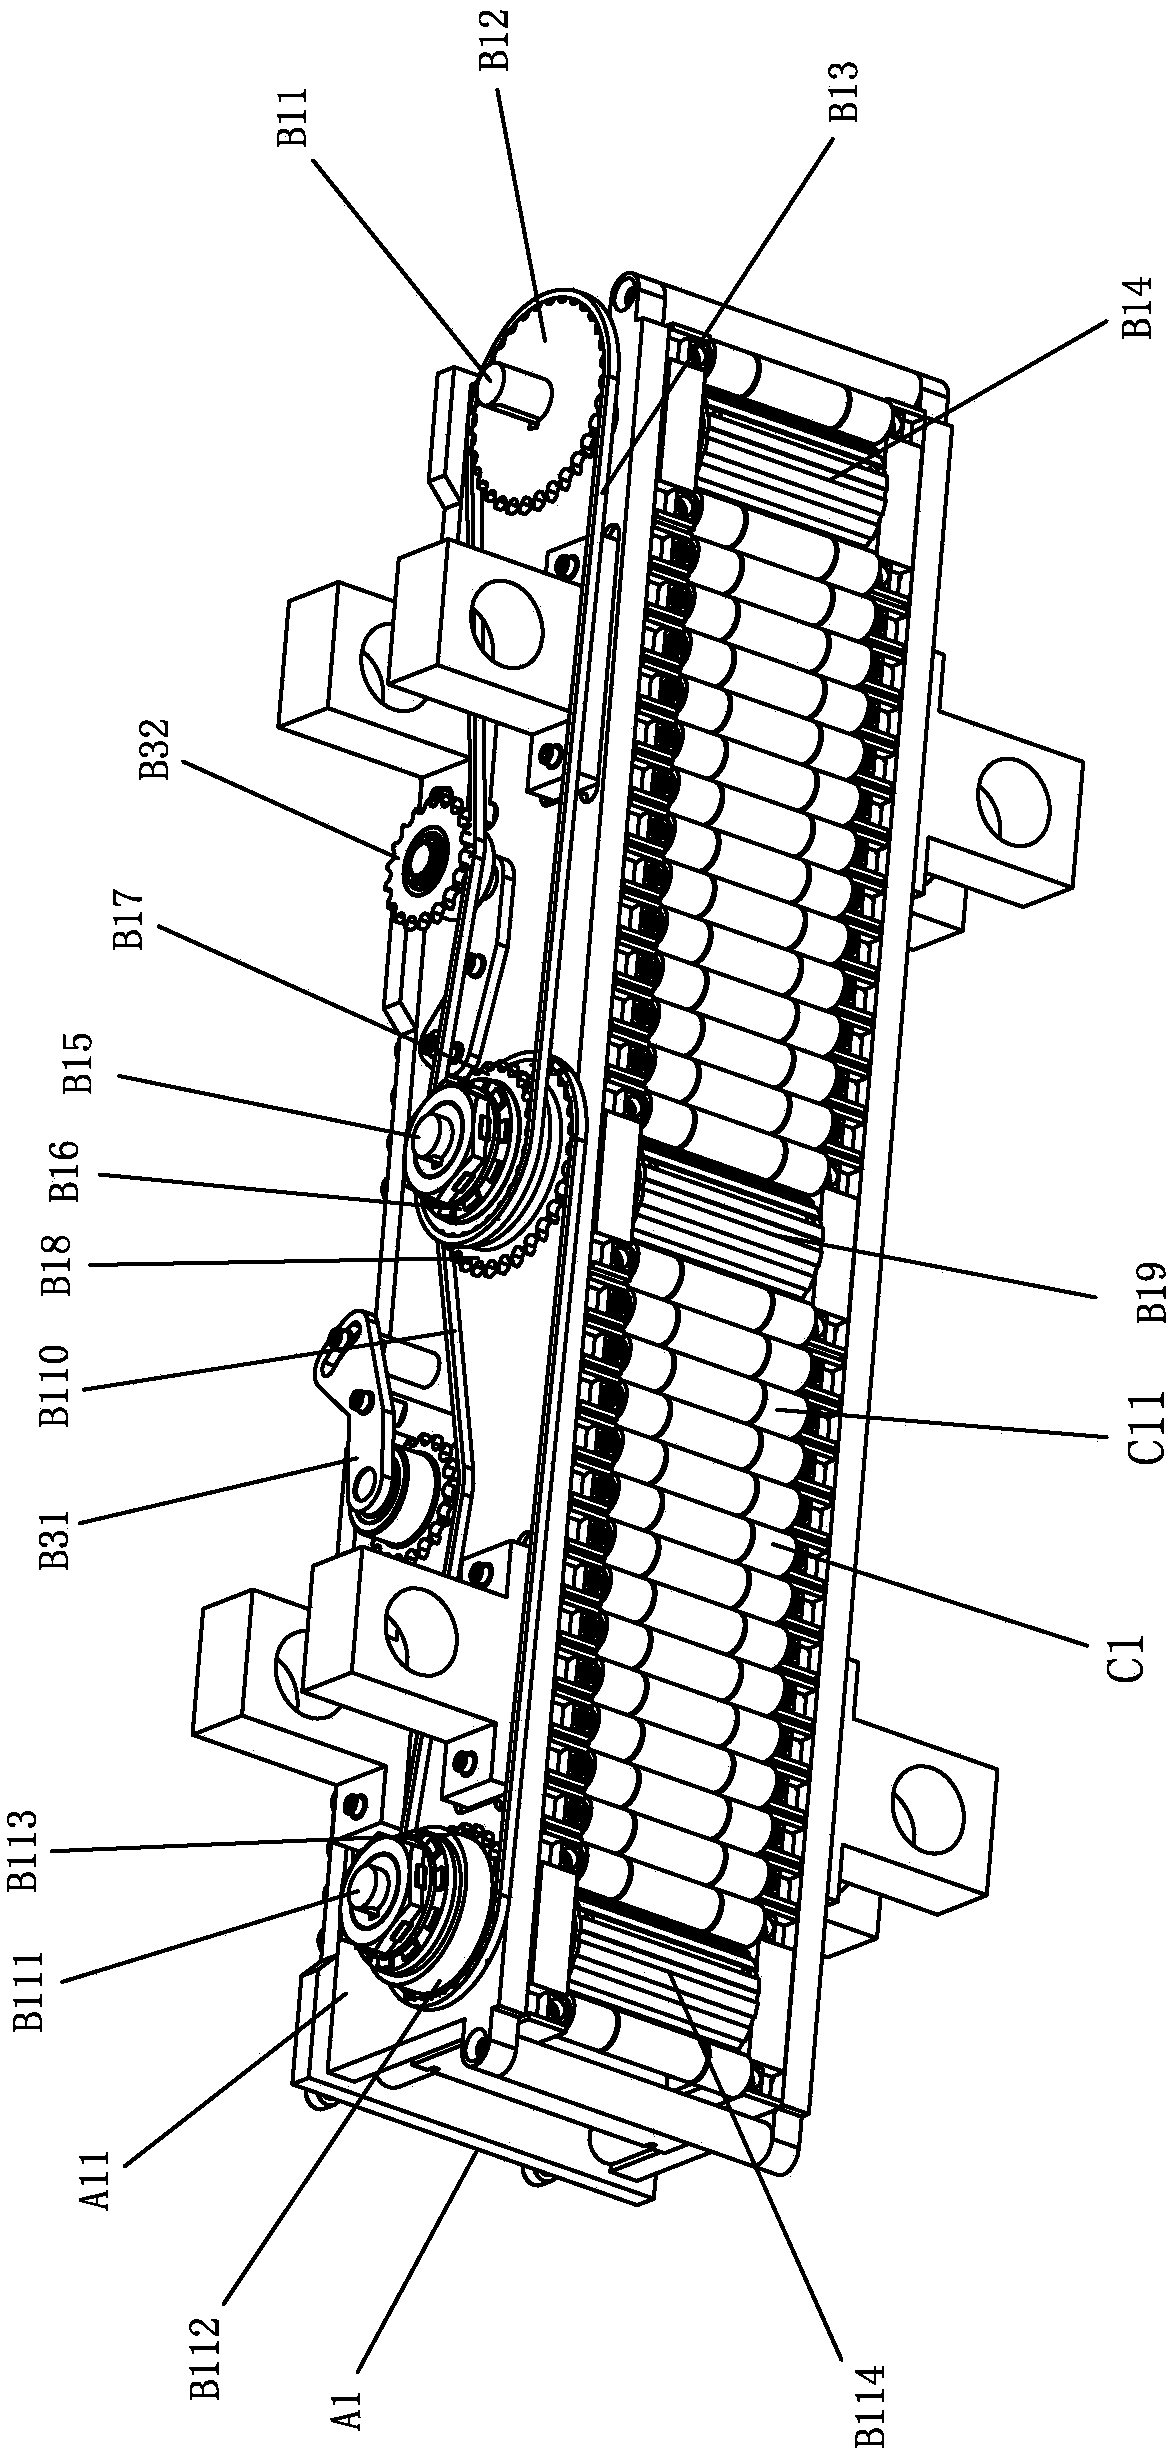 Batten pre-connection assembly for wood-processing machine